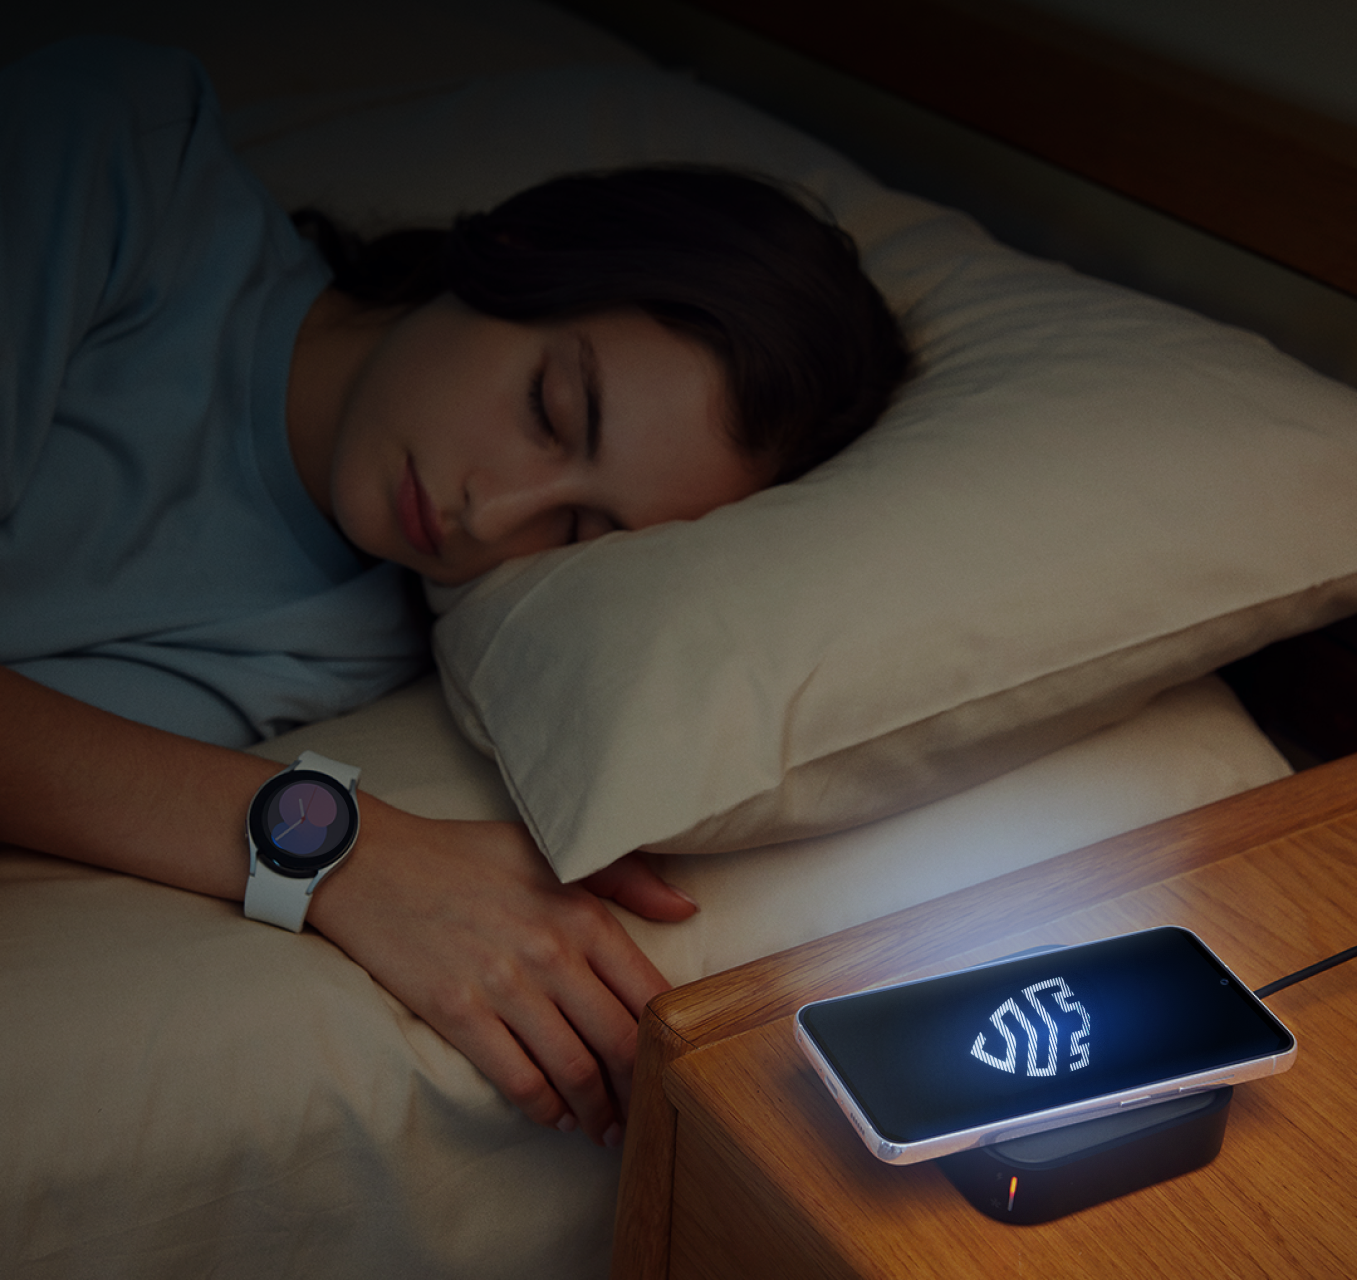 Person sleeping in the dark next to a Samsung mobile device displaying an illuminated Knox logo.